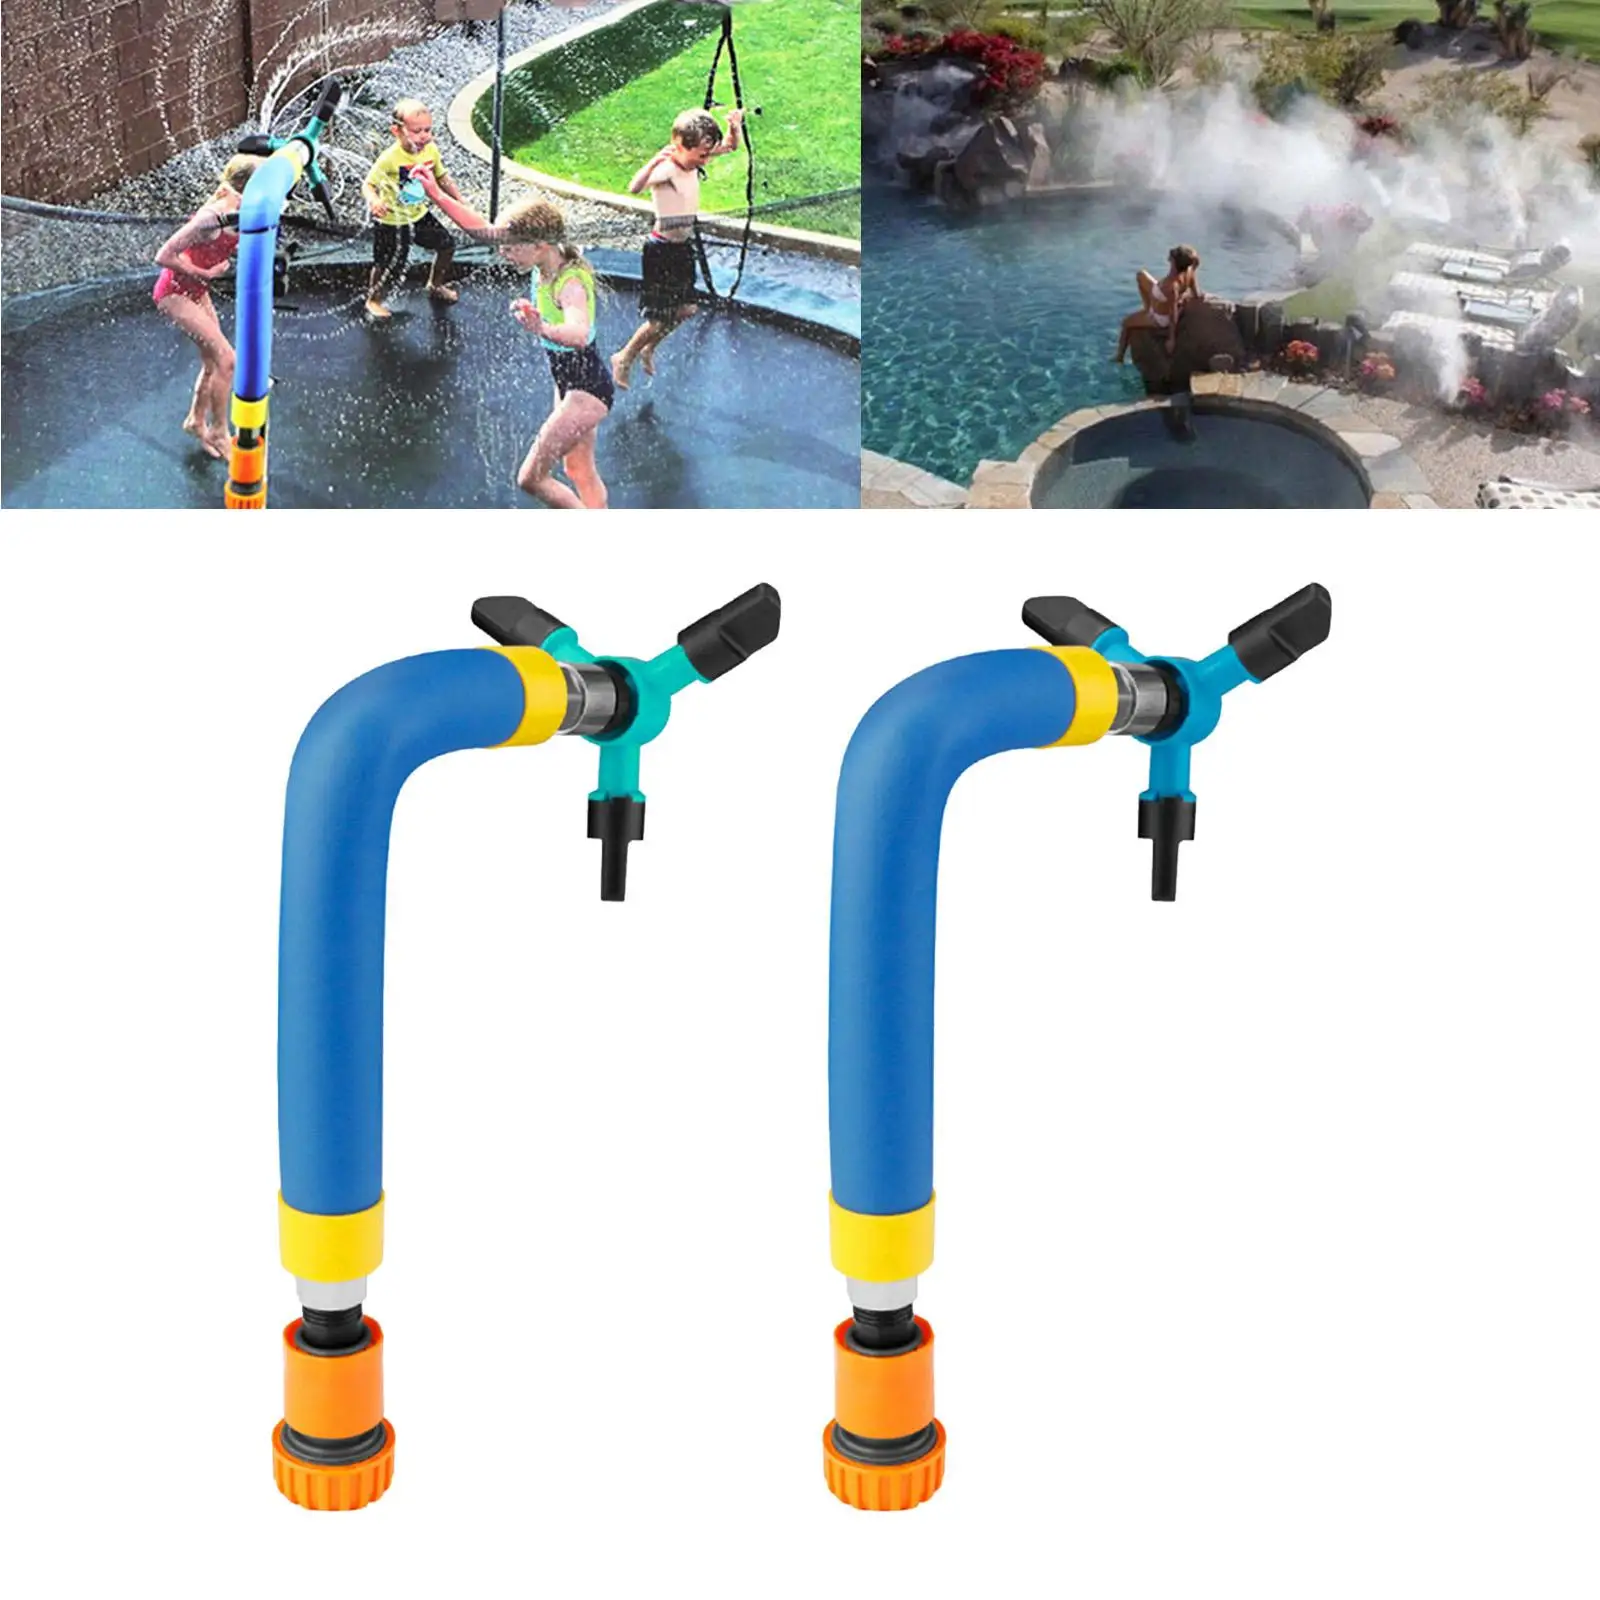 Trampoline Sprinkler    Trampoline Accessories for Outside Water Games Fun Trampoline Toys